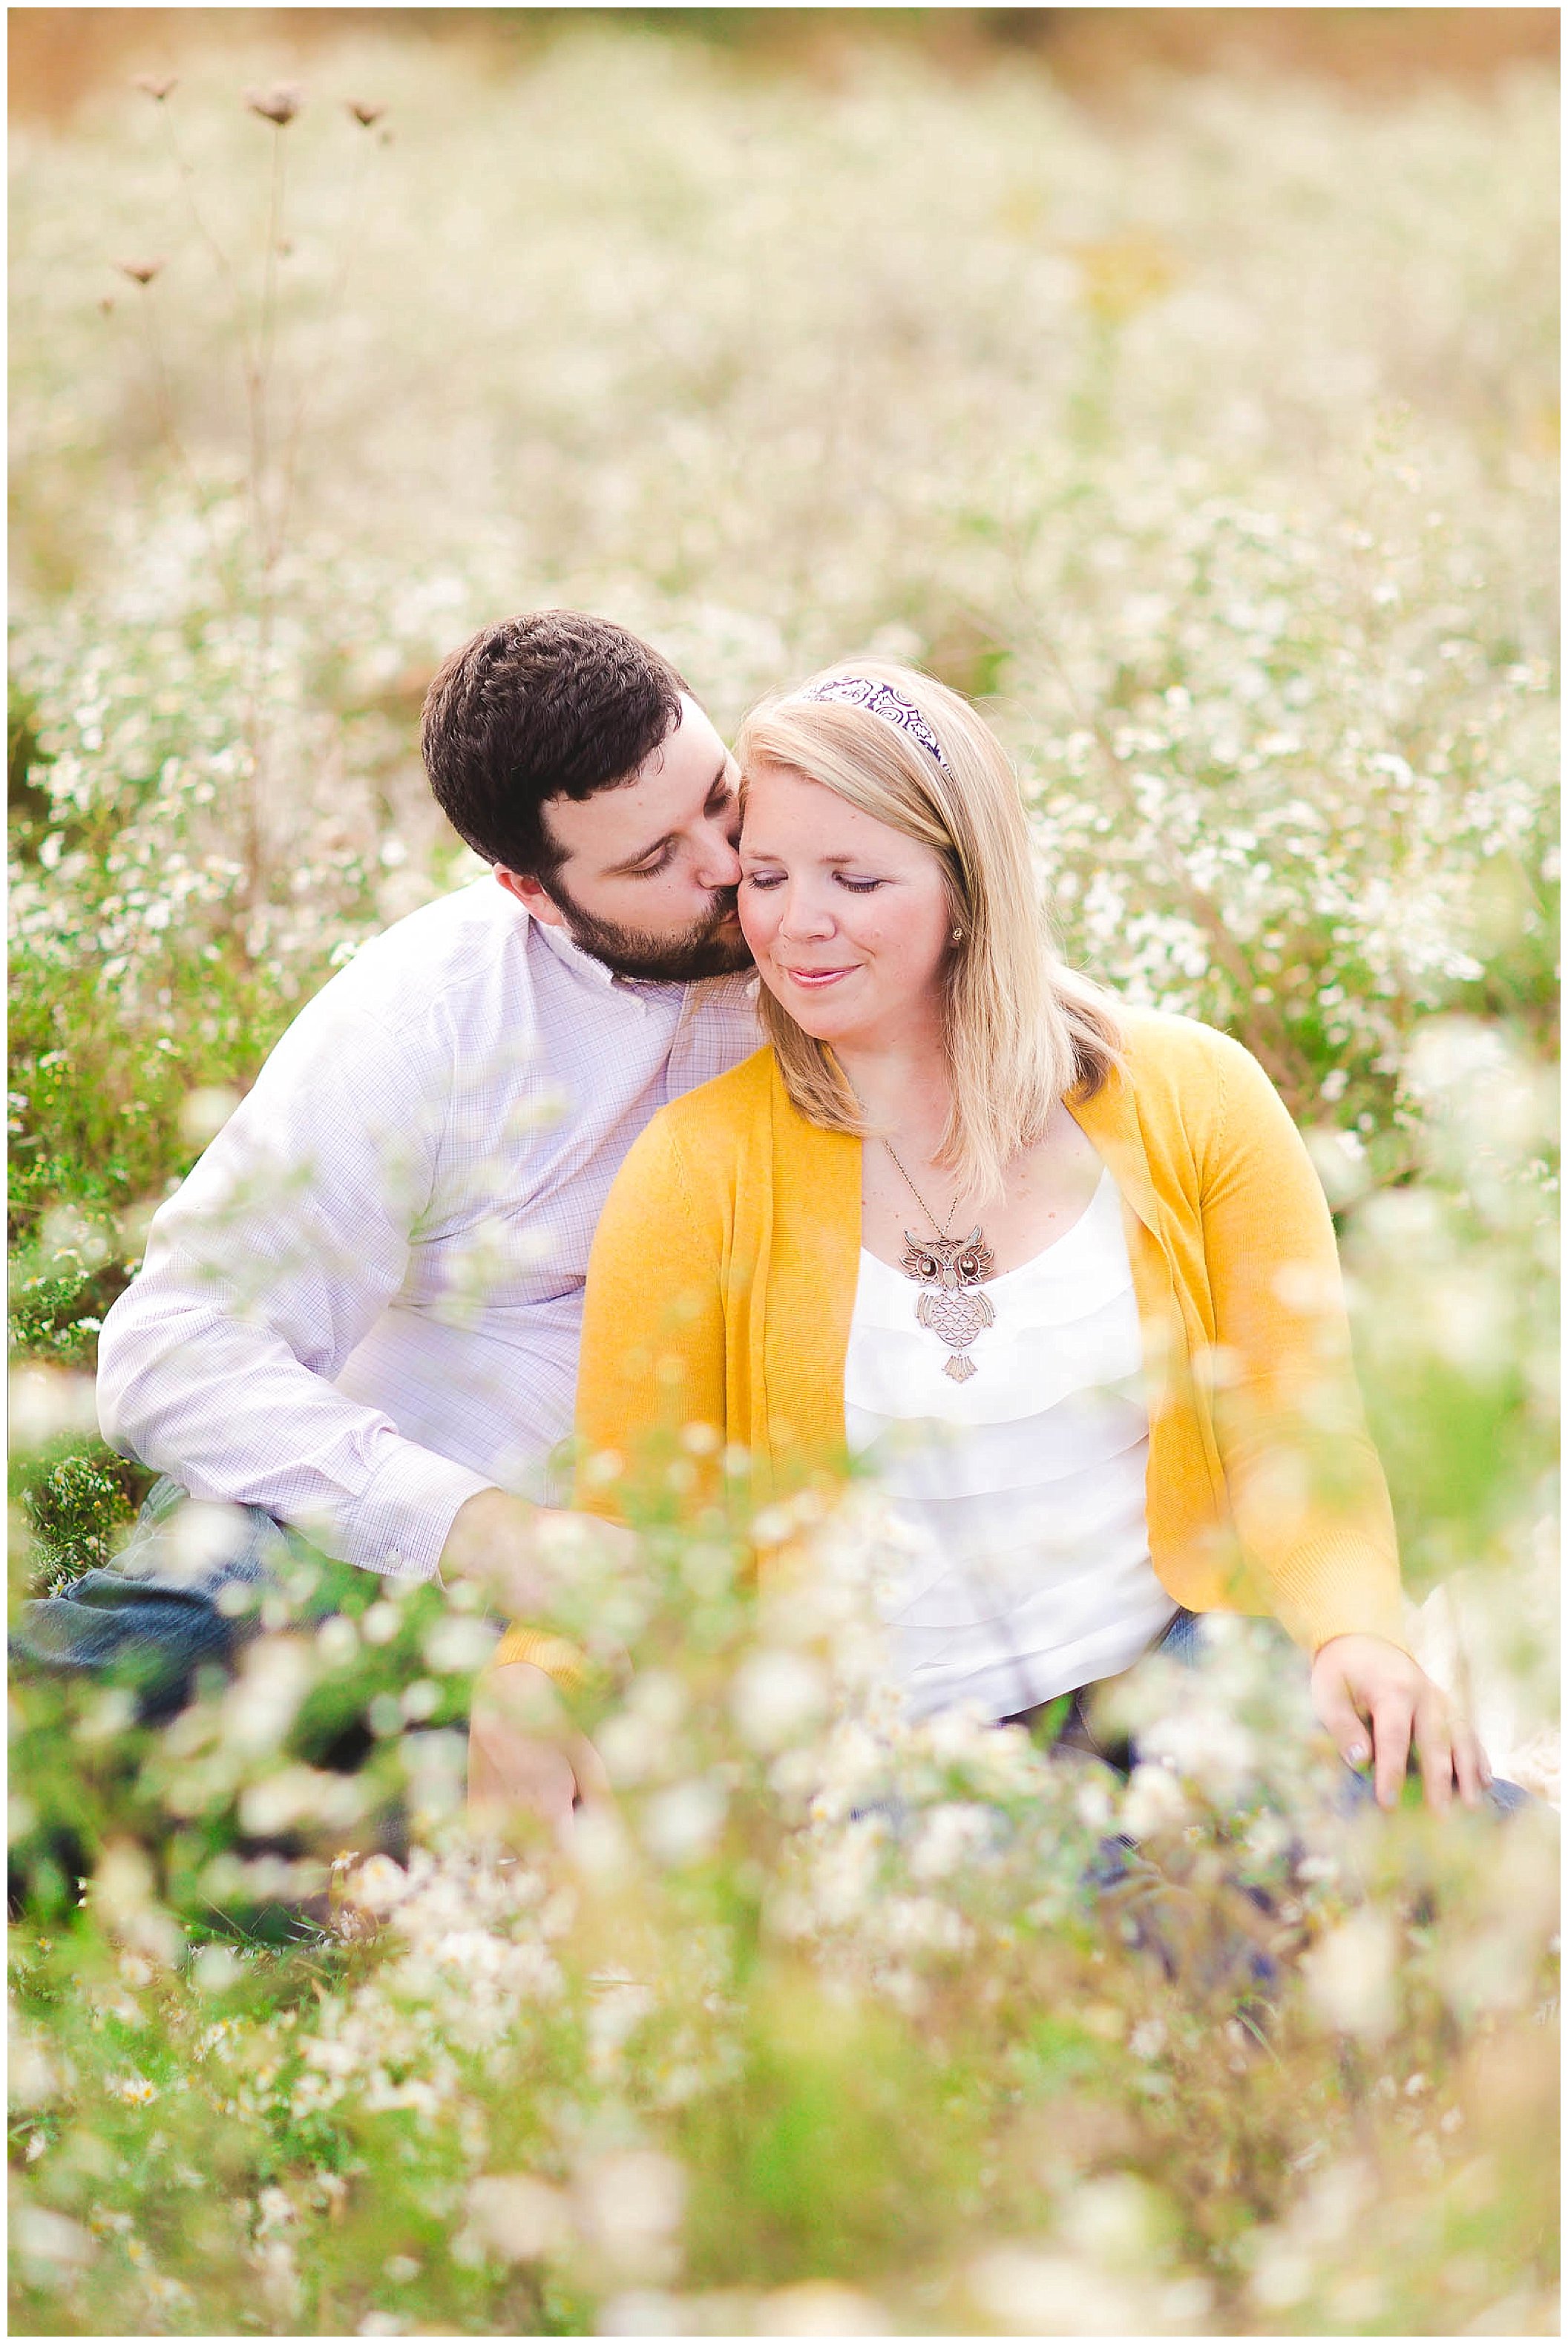 Sunshine filled engagement session in a field of wildflowers, Fort Wayne Indiana Wedding Photographer_0015.jpg